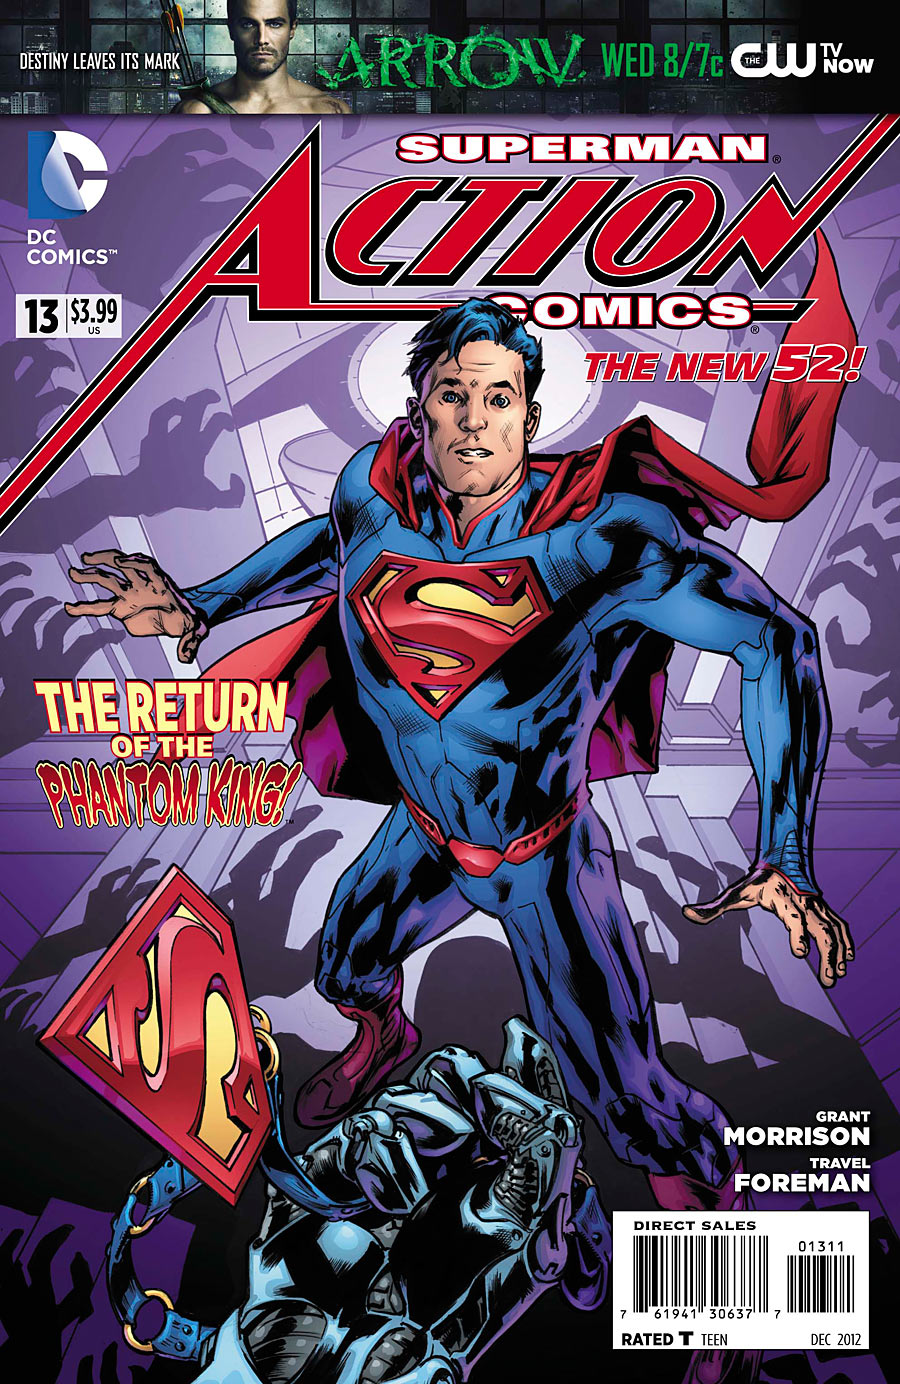 Action Comics (The New 52) #13